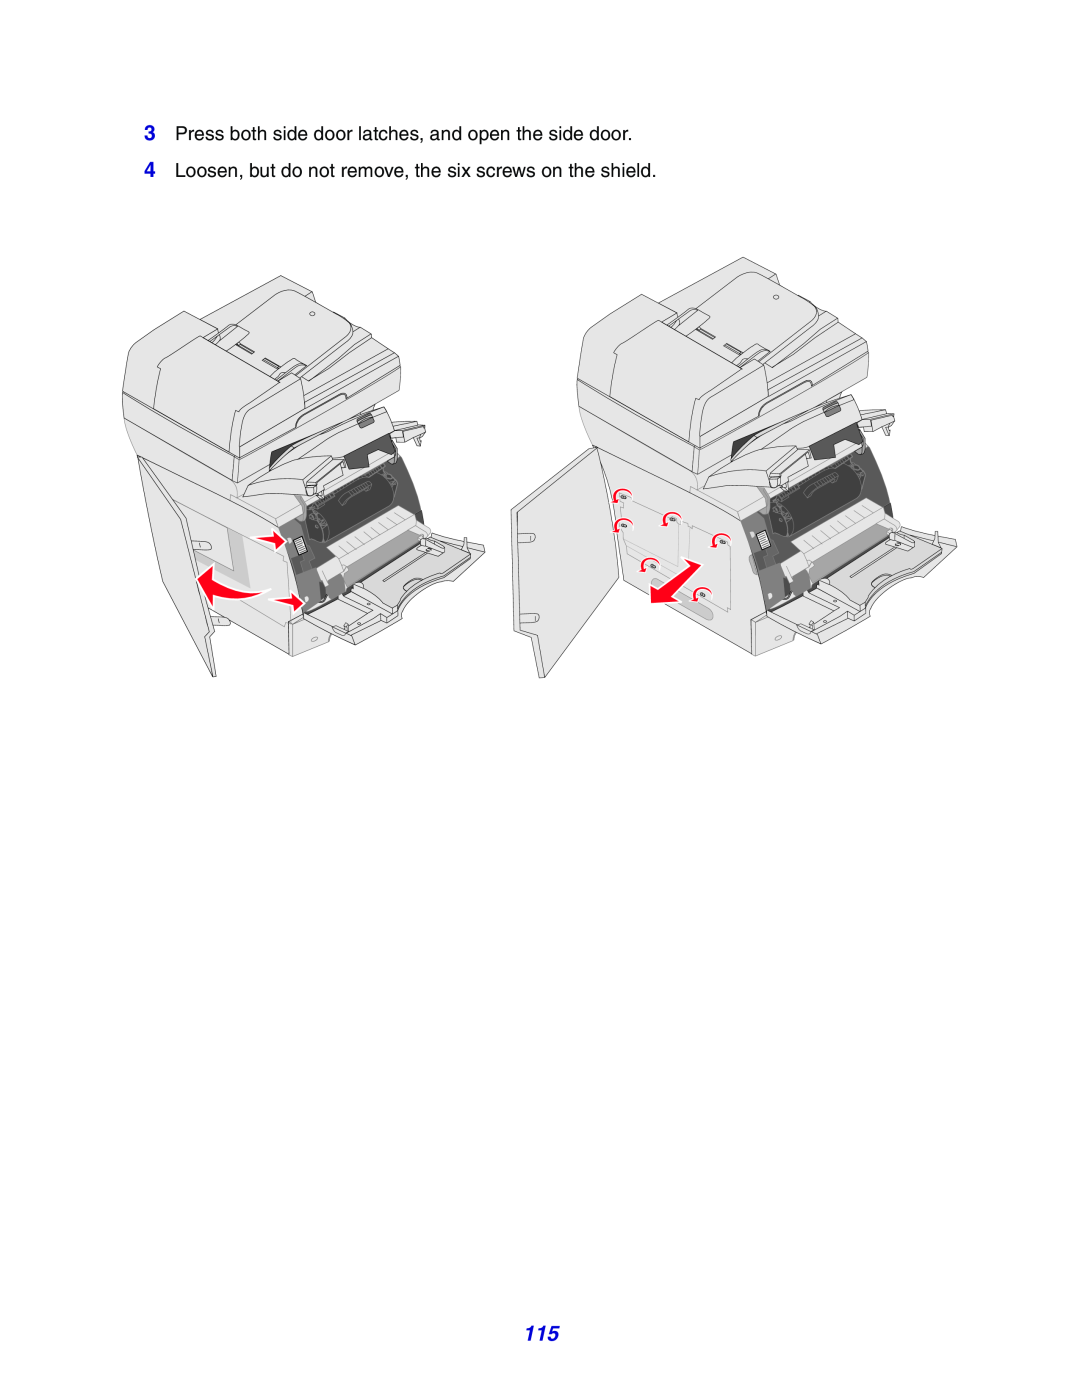 Lexmark X642e manual Press both side door latches, and open the side door 